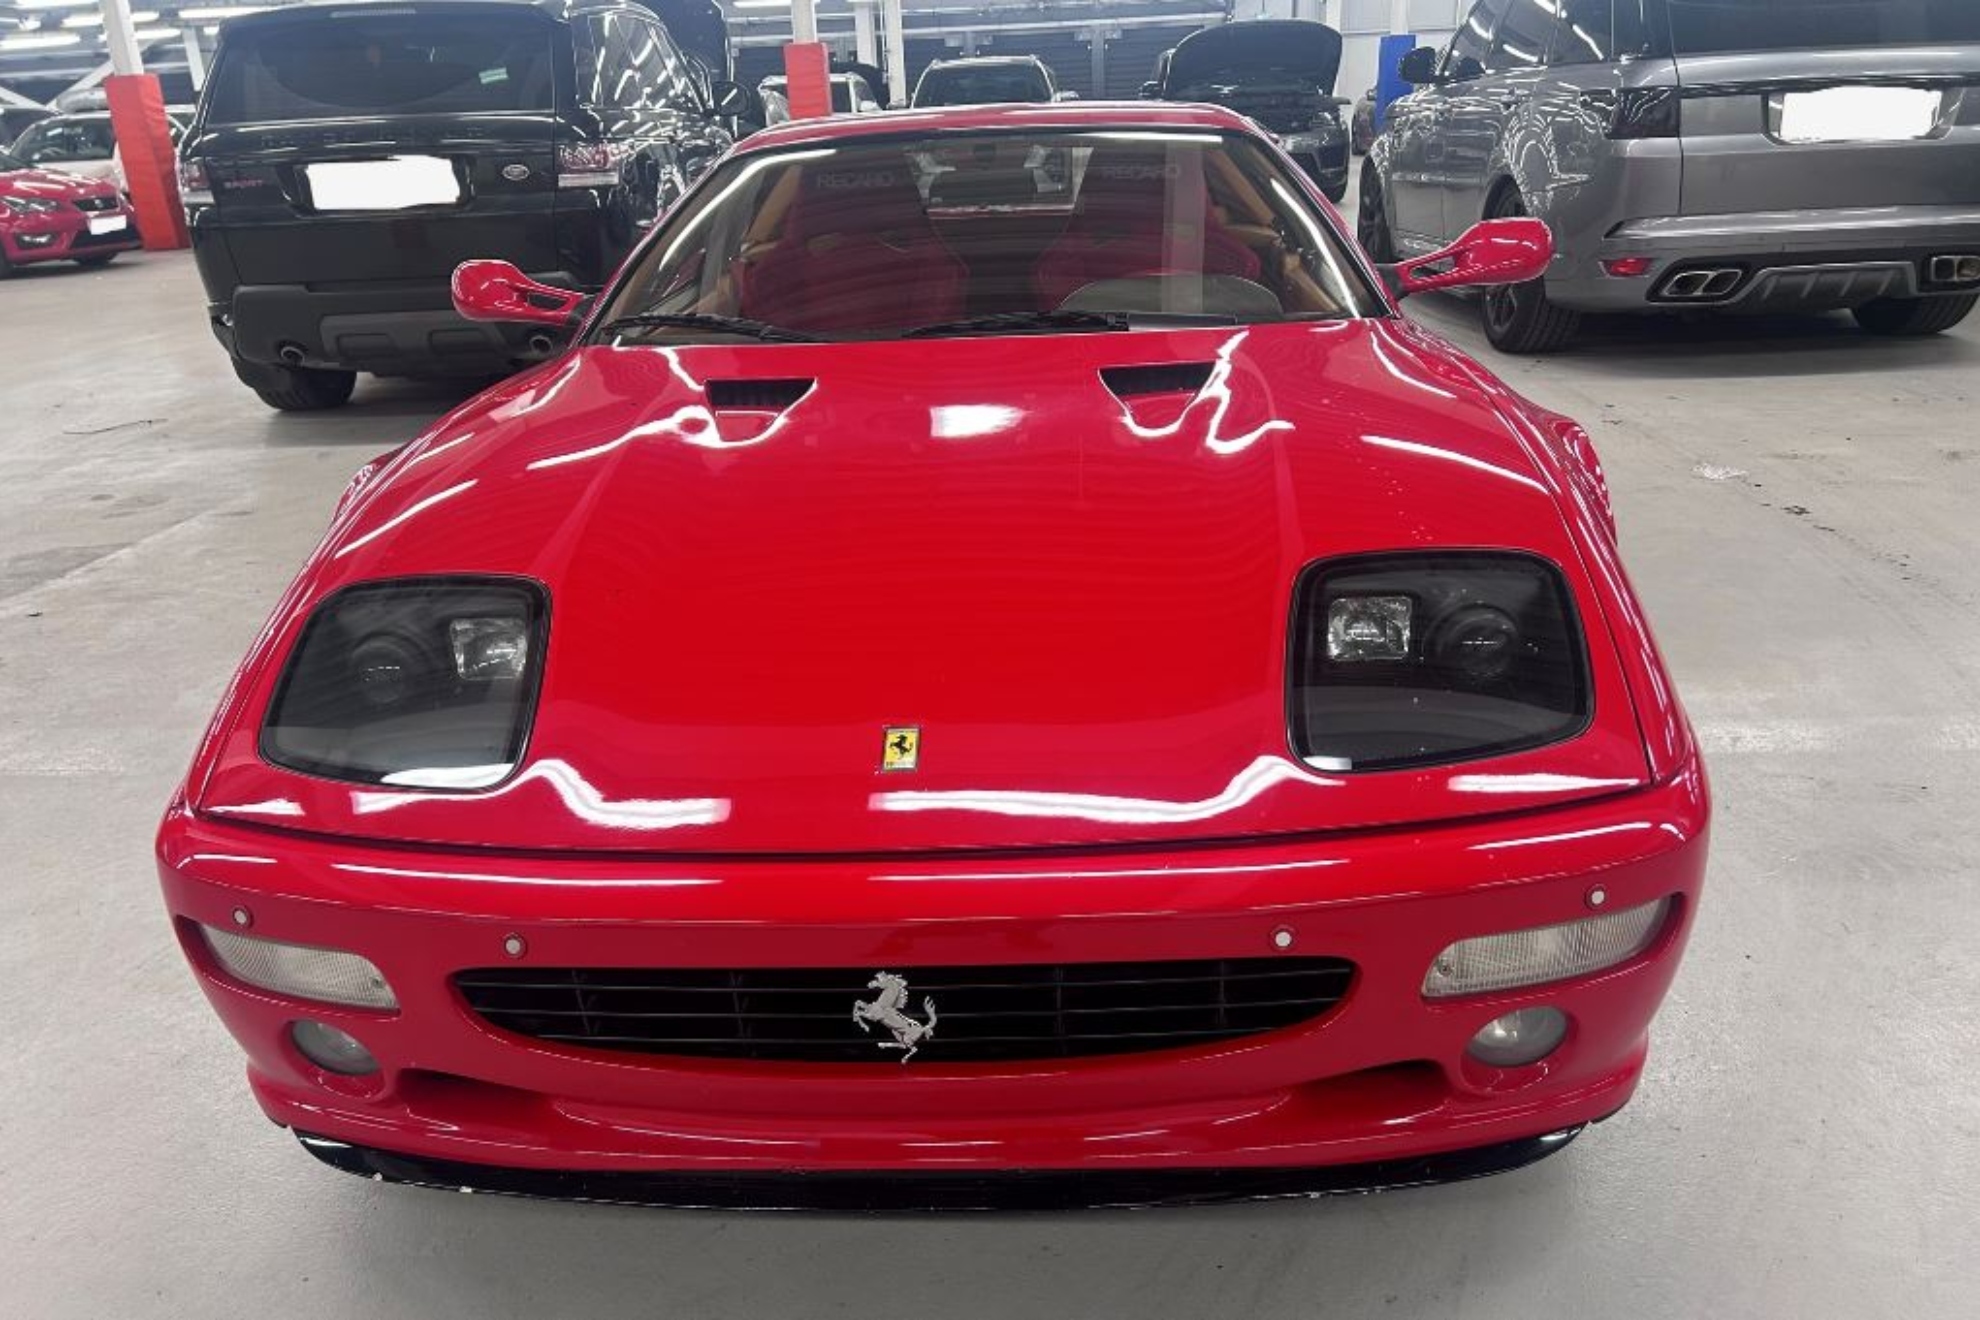 This Ferrari F512M has been recovered after almost three decades.